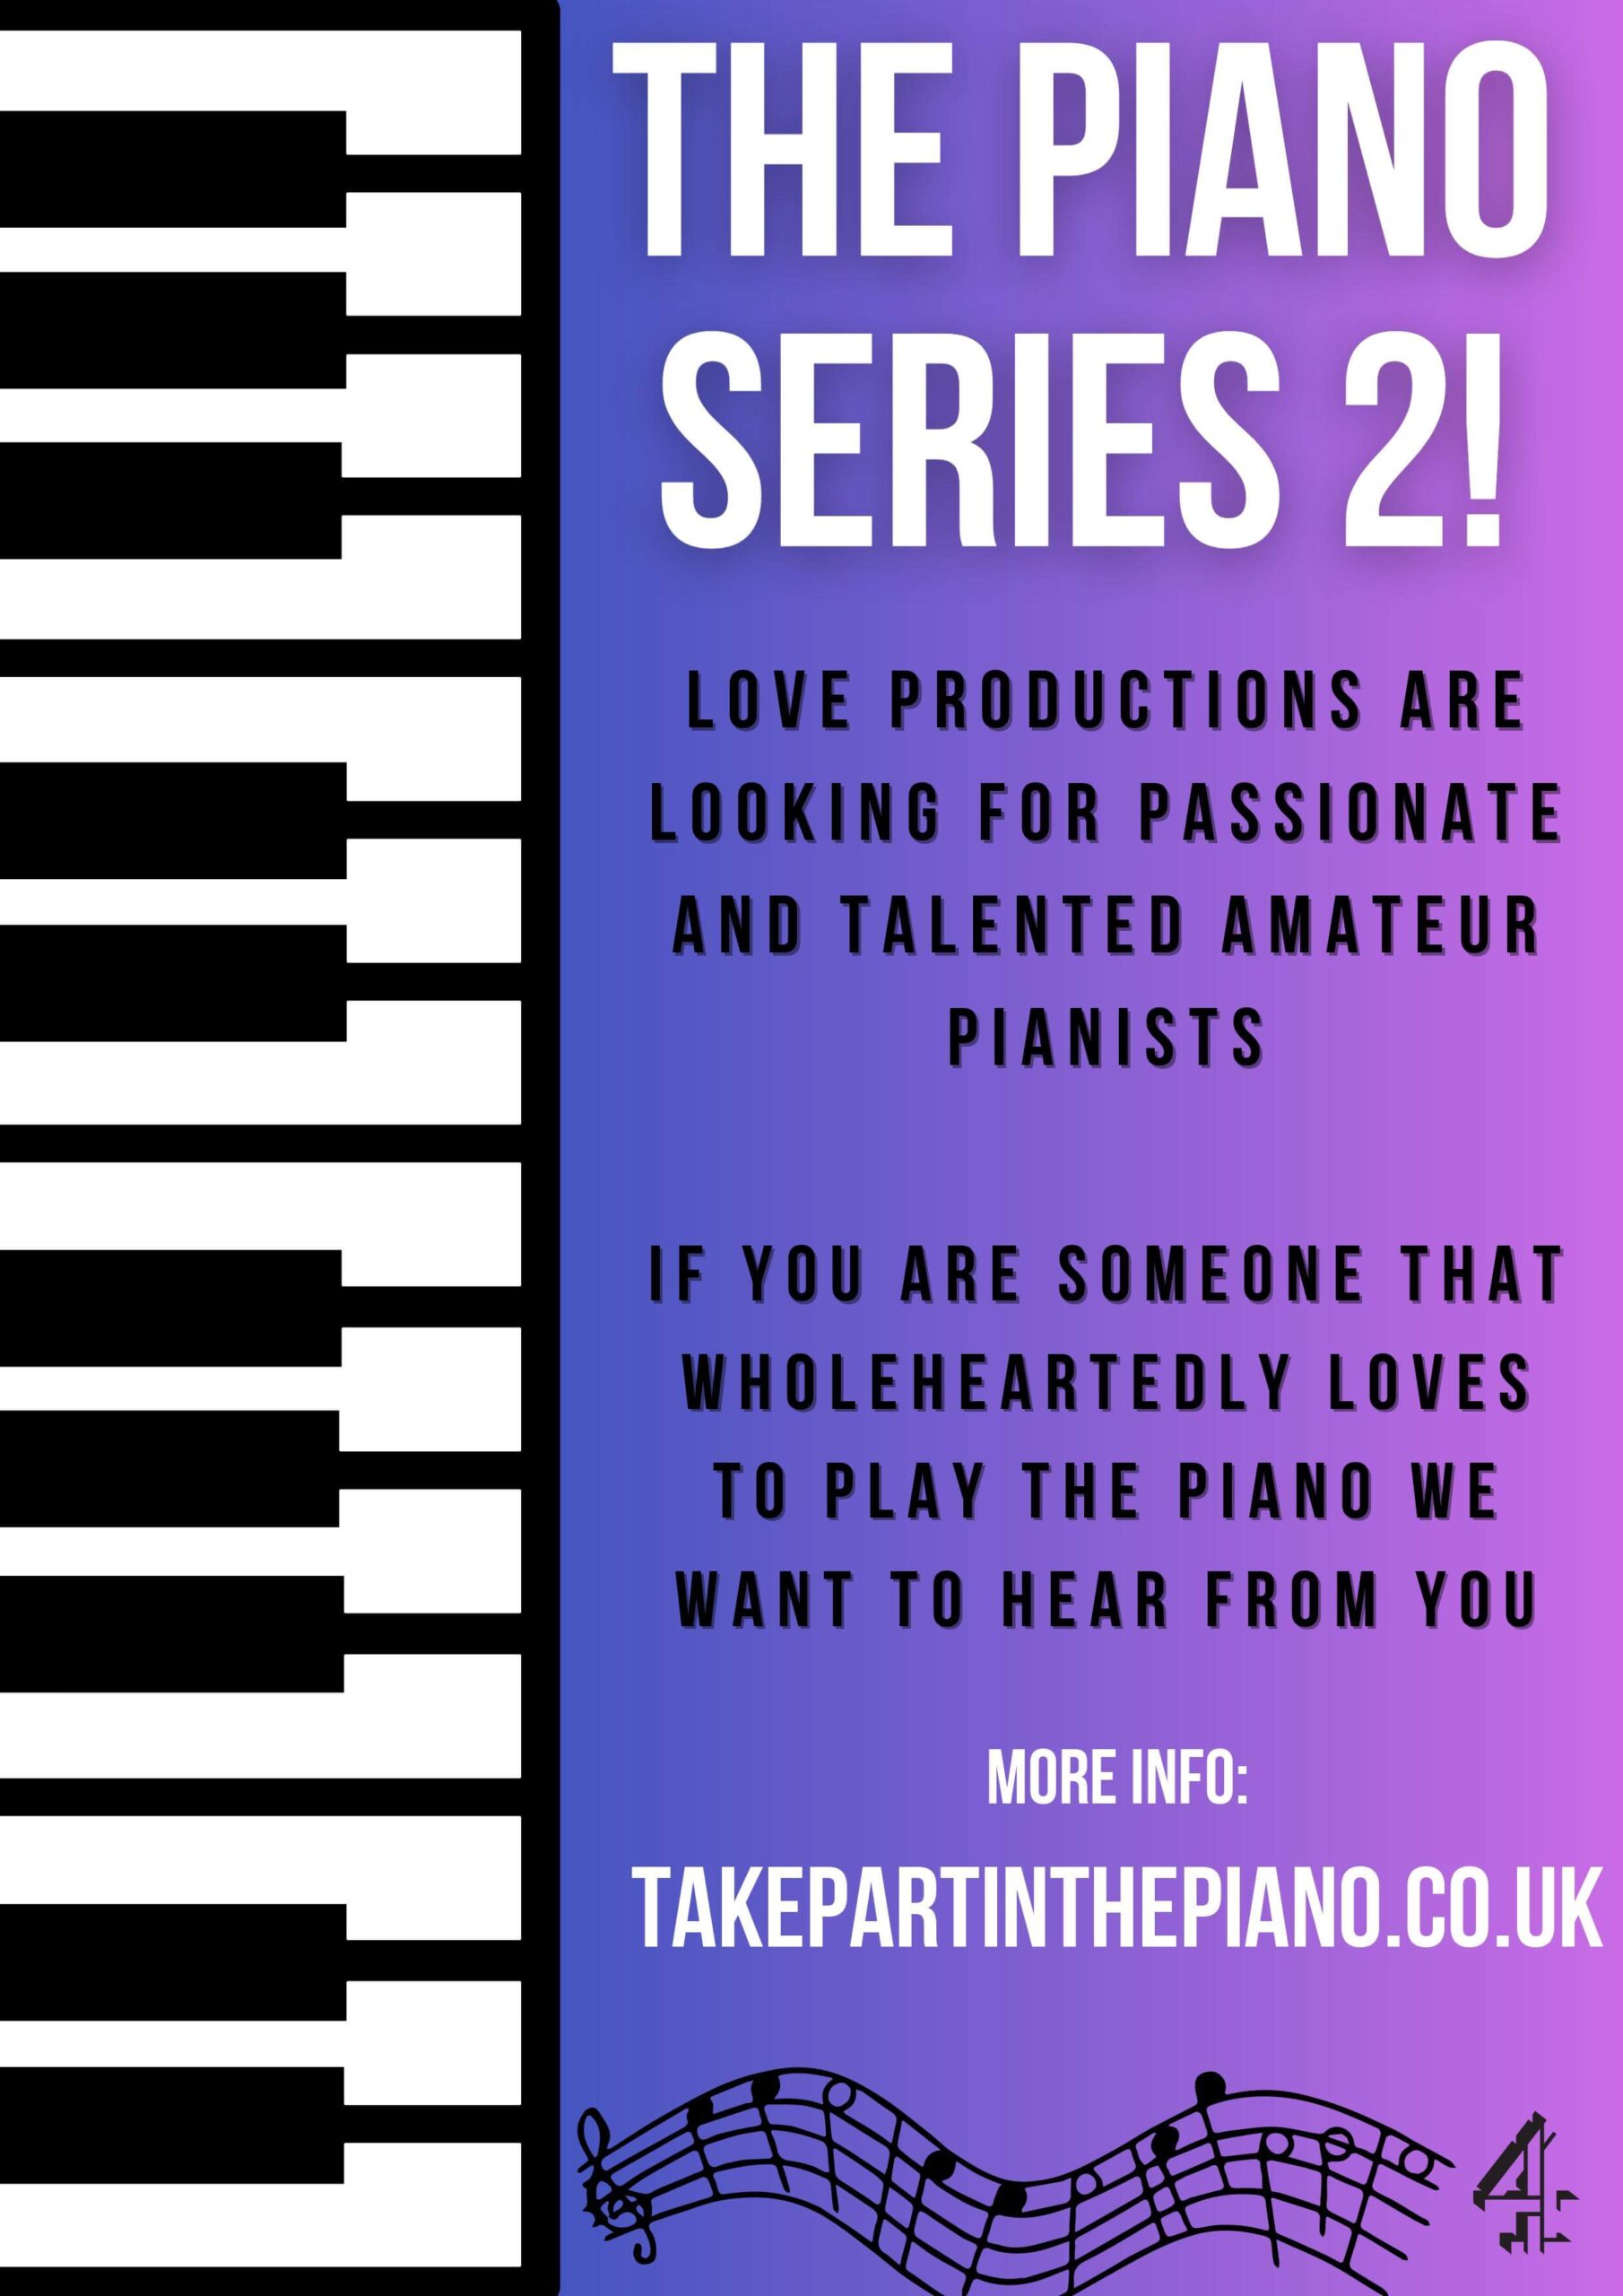 Apply to be on The Piano